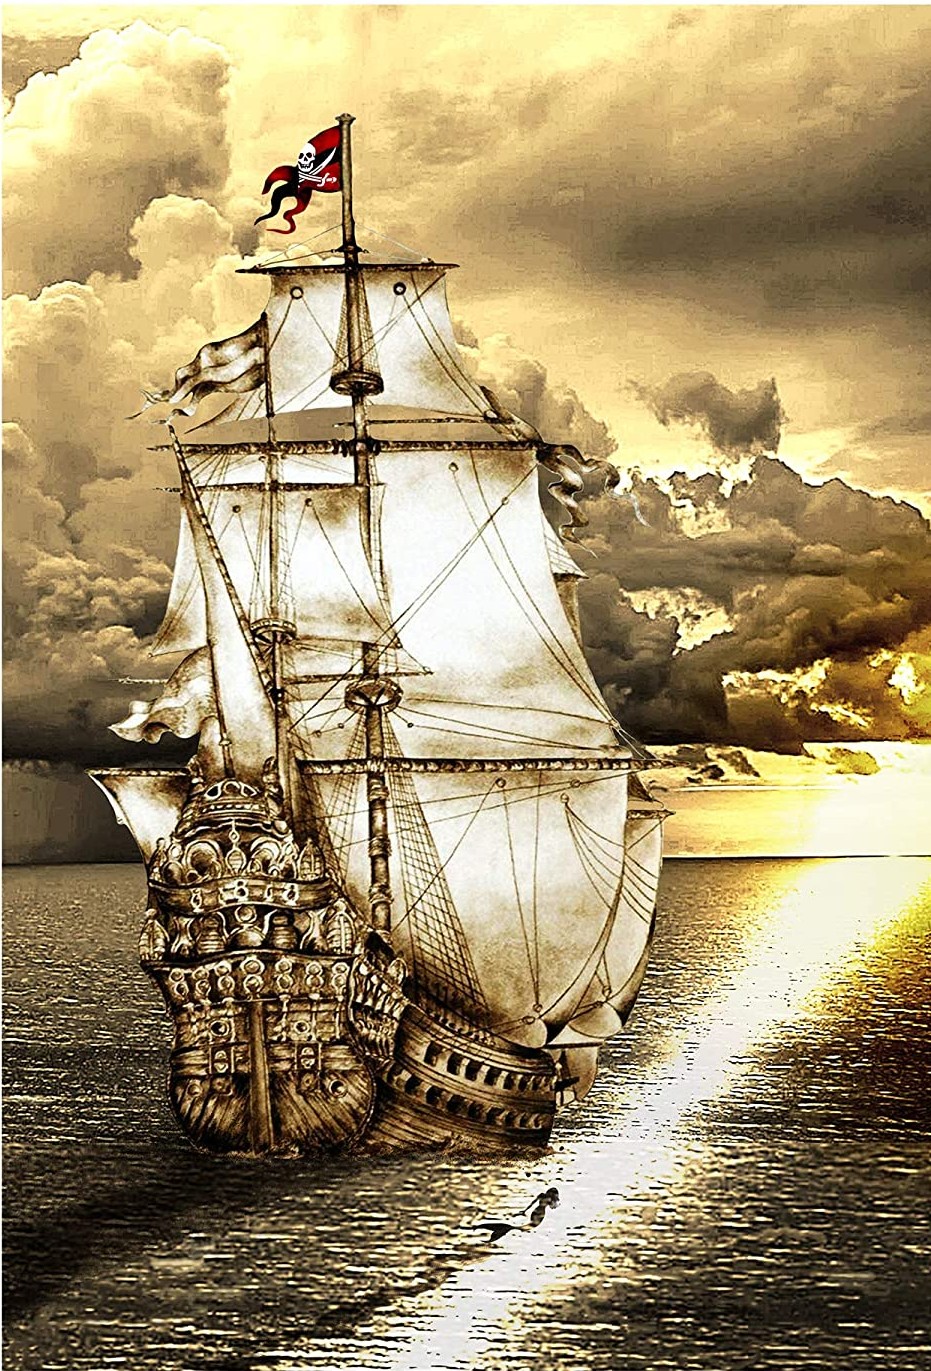 Imagined sail of infamous sea raiders ship off to a beautiful sunset in the waters of America’s territory.